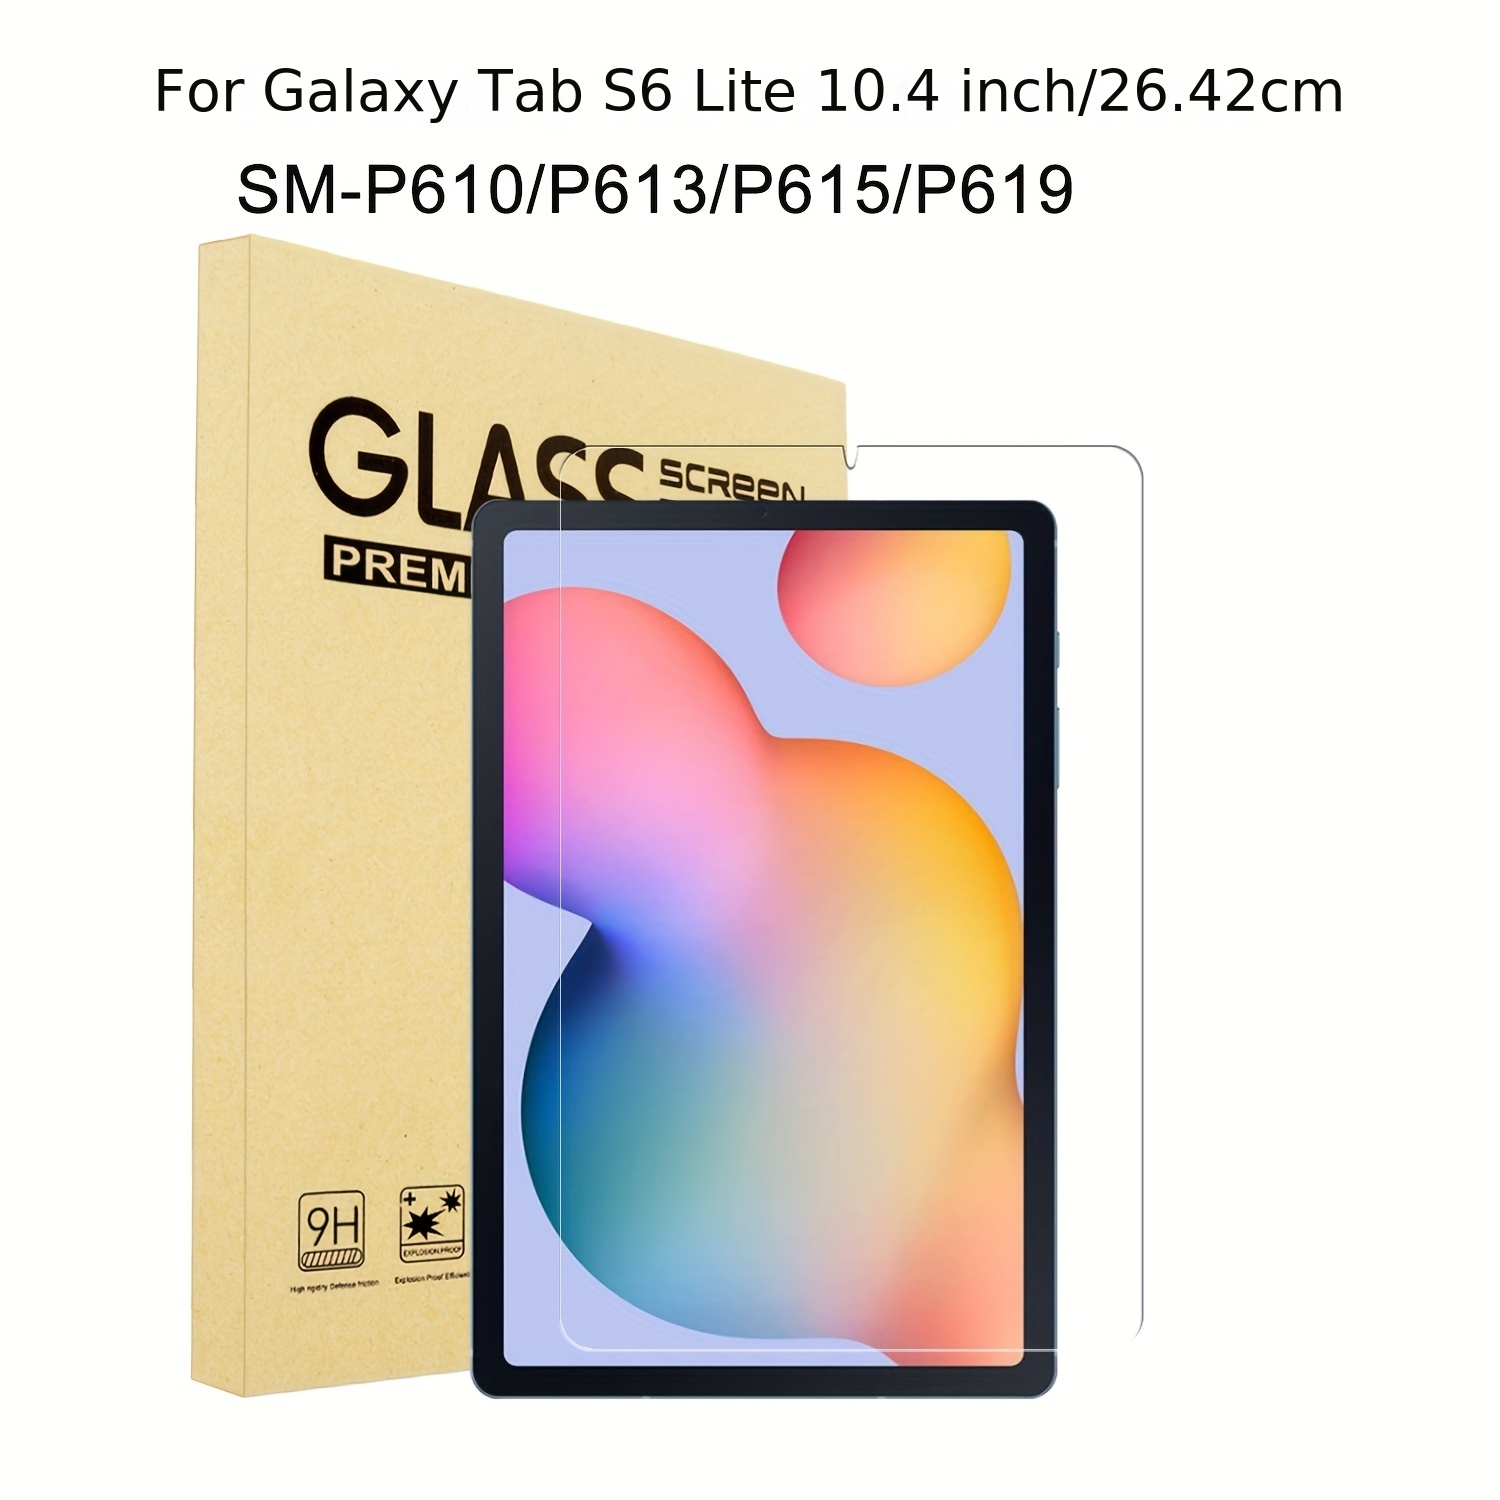 Galaxy Tab S6 Lite 2020 Specifications